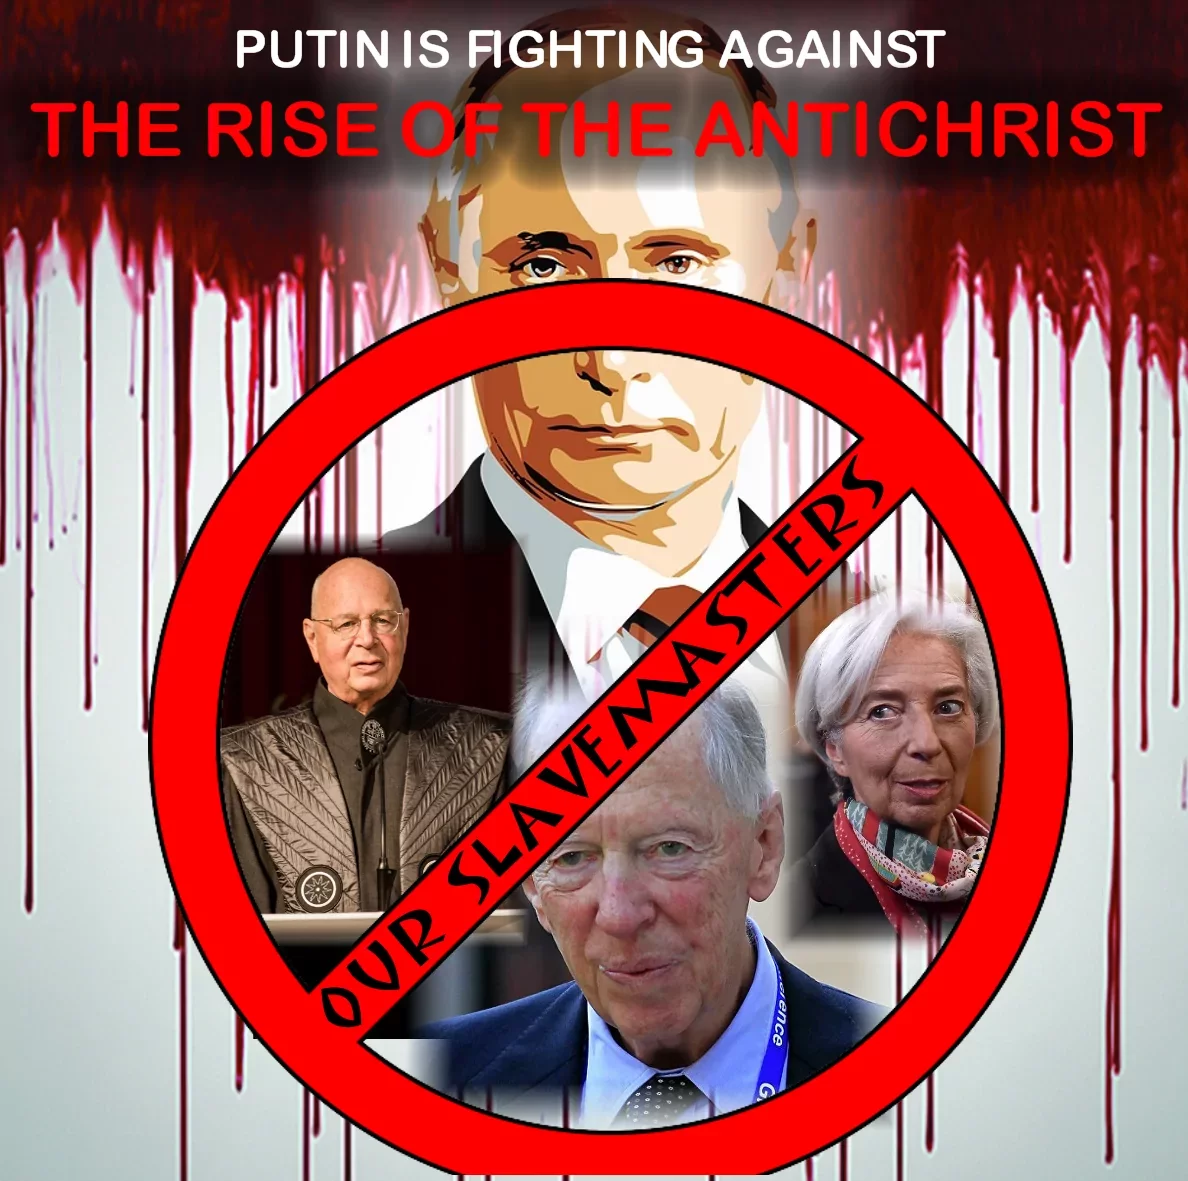 RUSSIA IS FIGHTING THE RISE OF THE ANTICHRIST